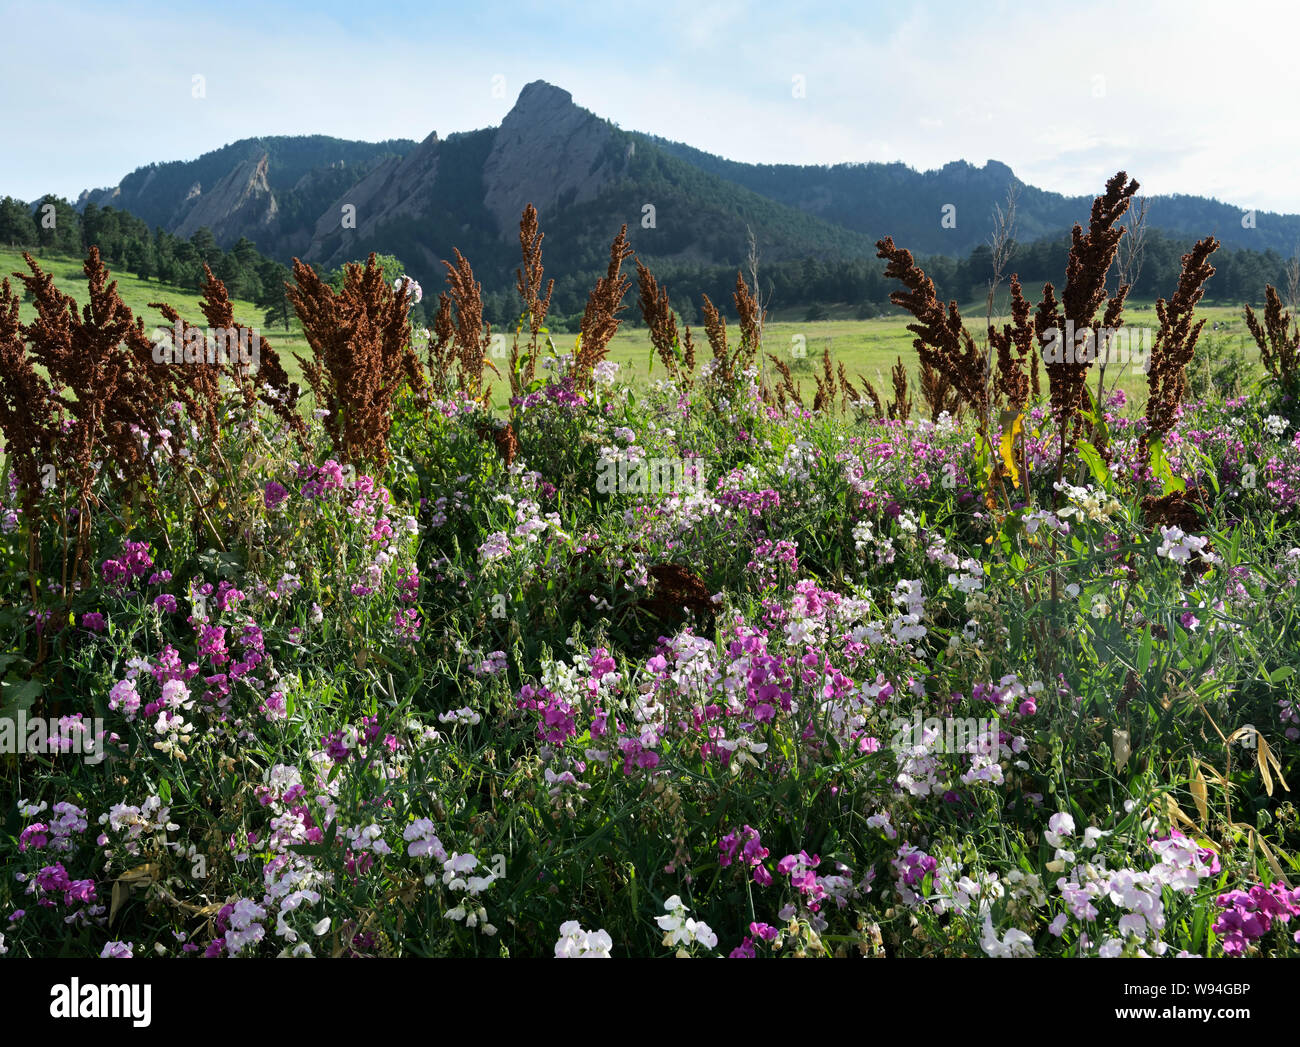 Boulder, Colorado the Flatirons from Chautauqua Park with wildflowers Stock Photo